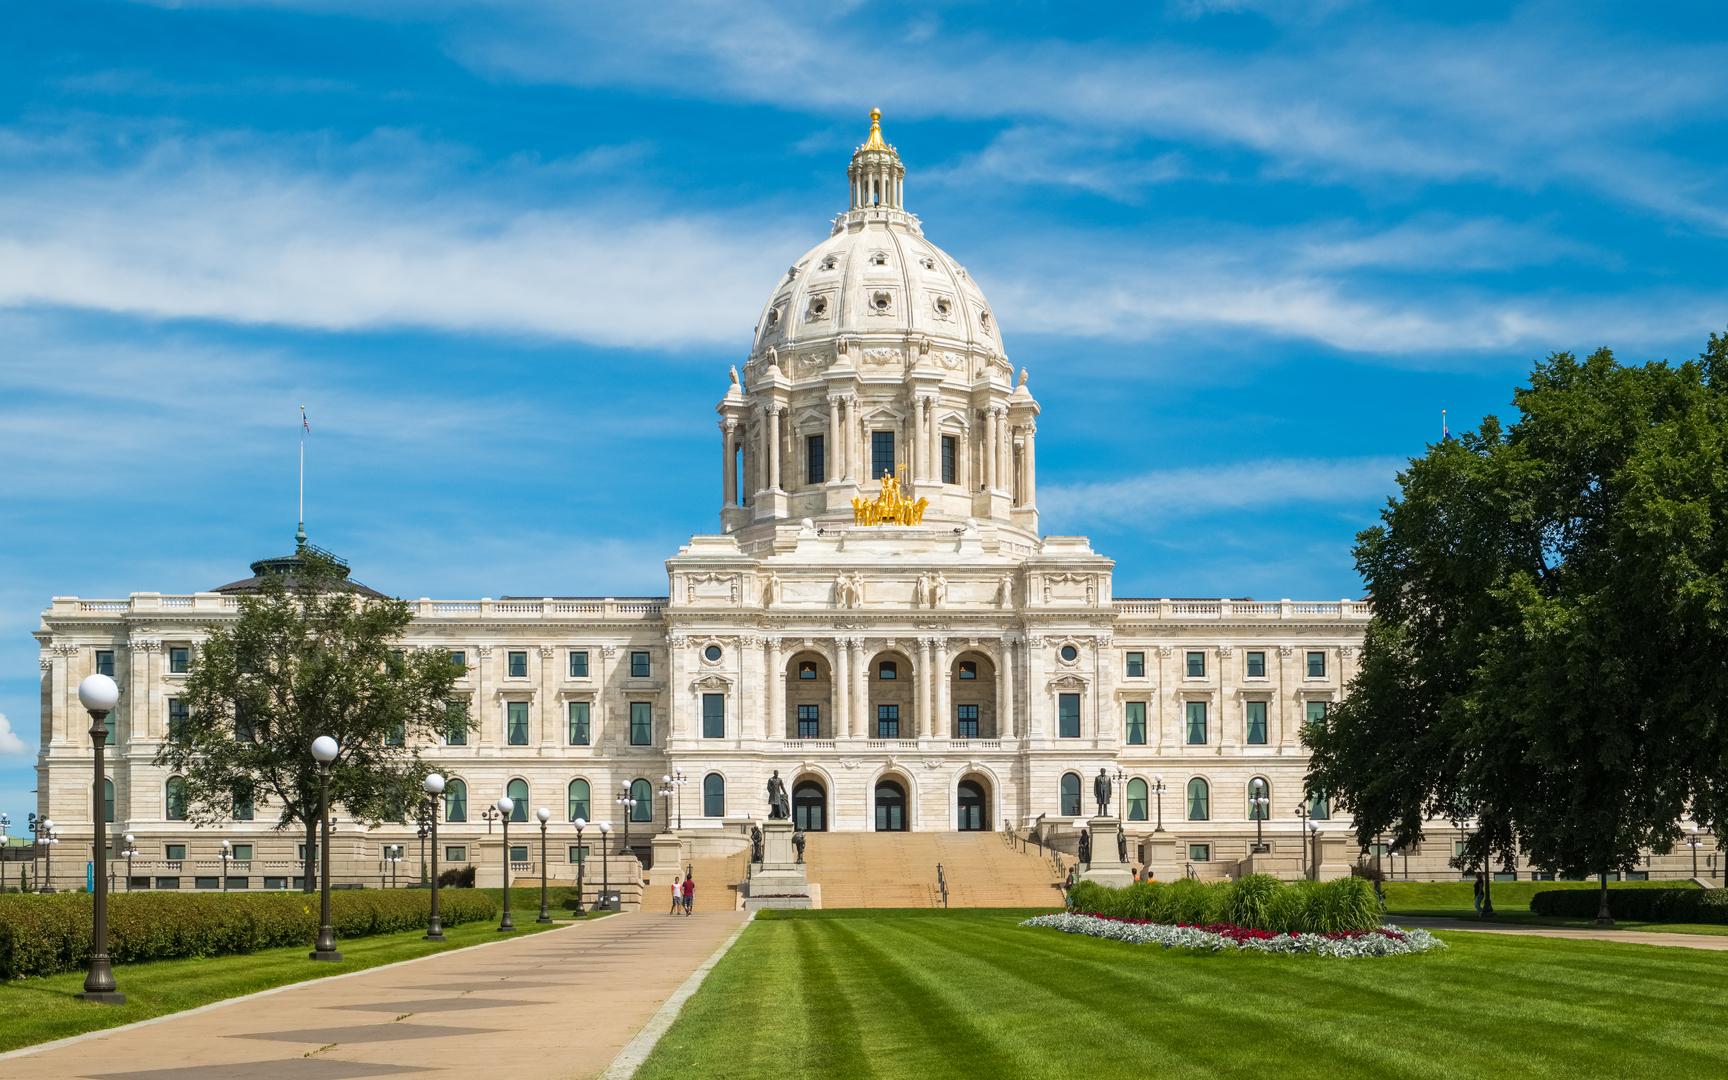 Public safety commissioner: Consider visiting MN Capitol another